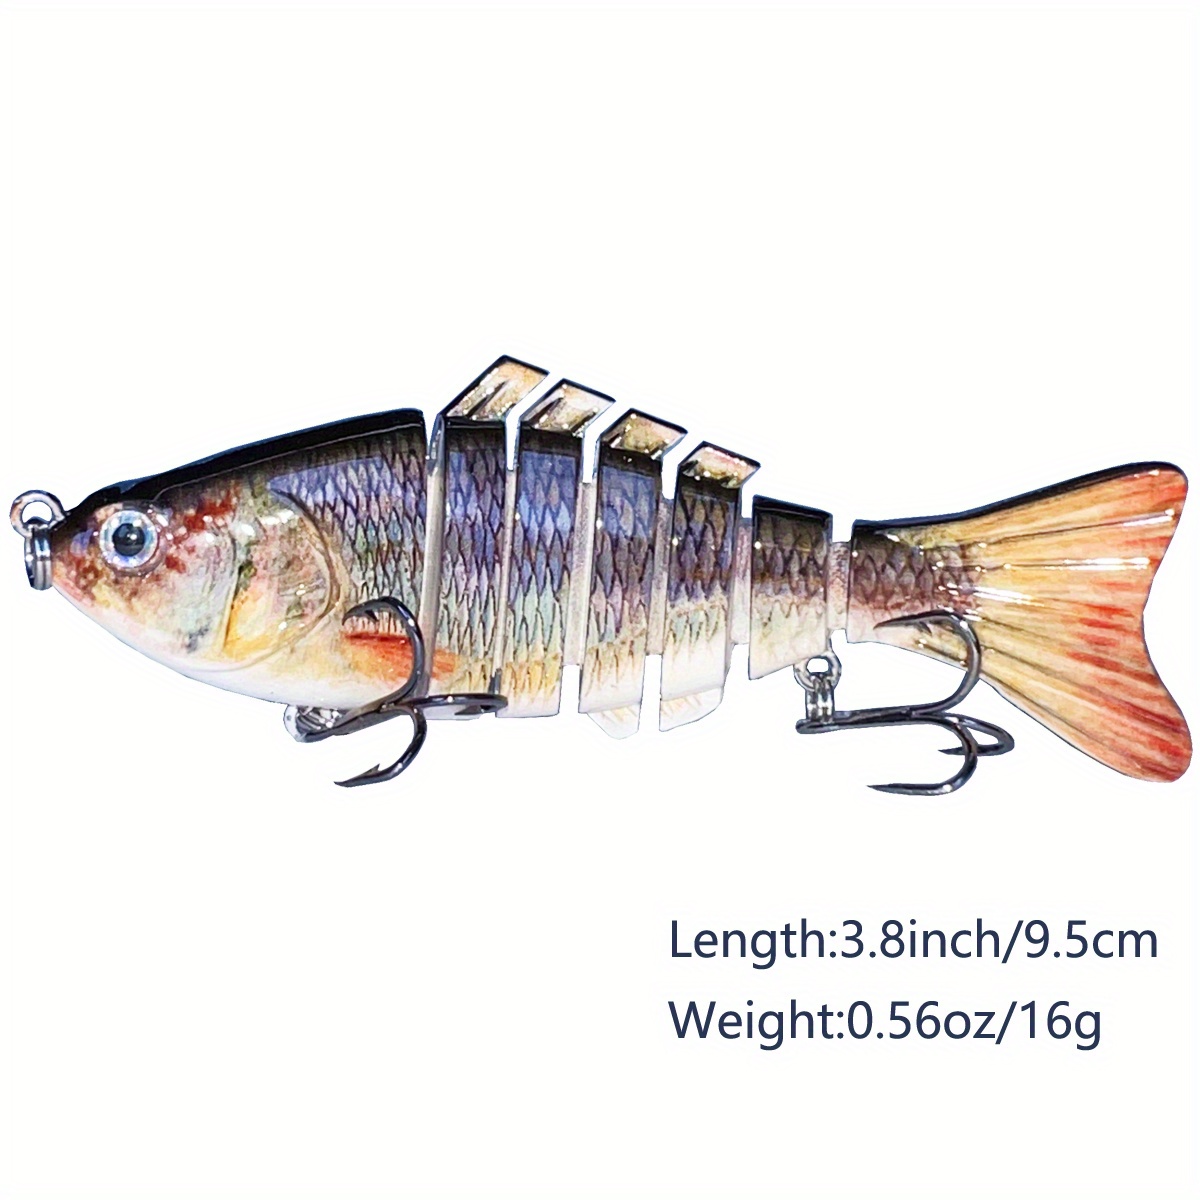 6 Best Lures for Targeting Striped Bass